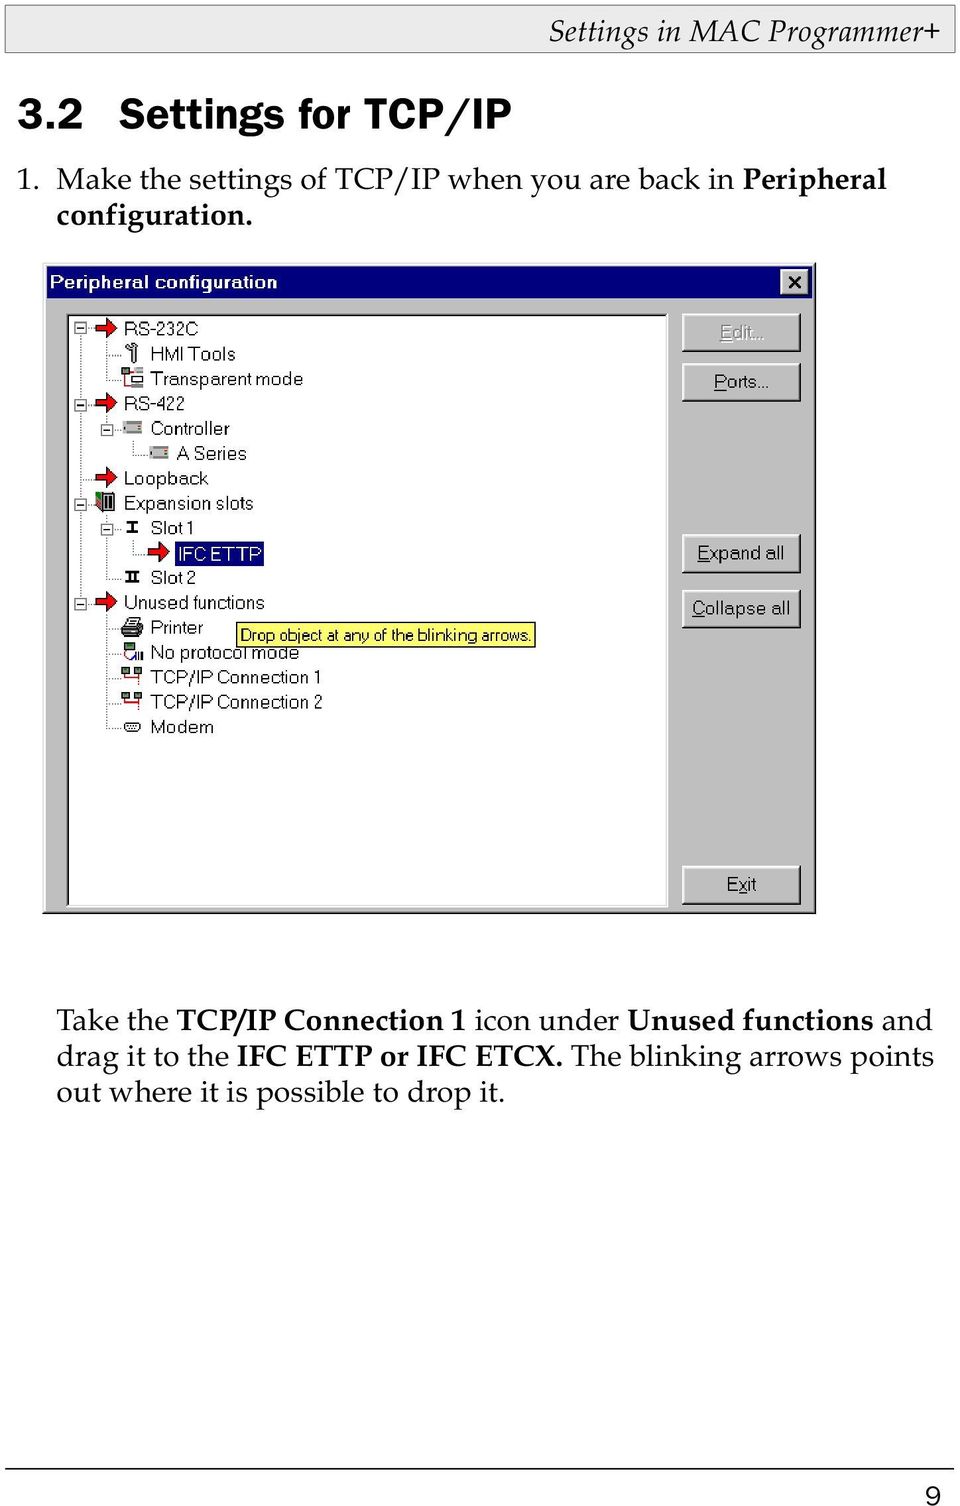 Take the TCP/IP Connection 1 icon under Unused functions and drag it to